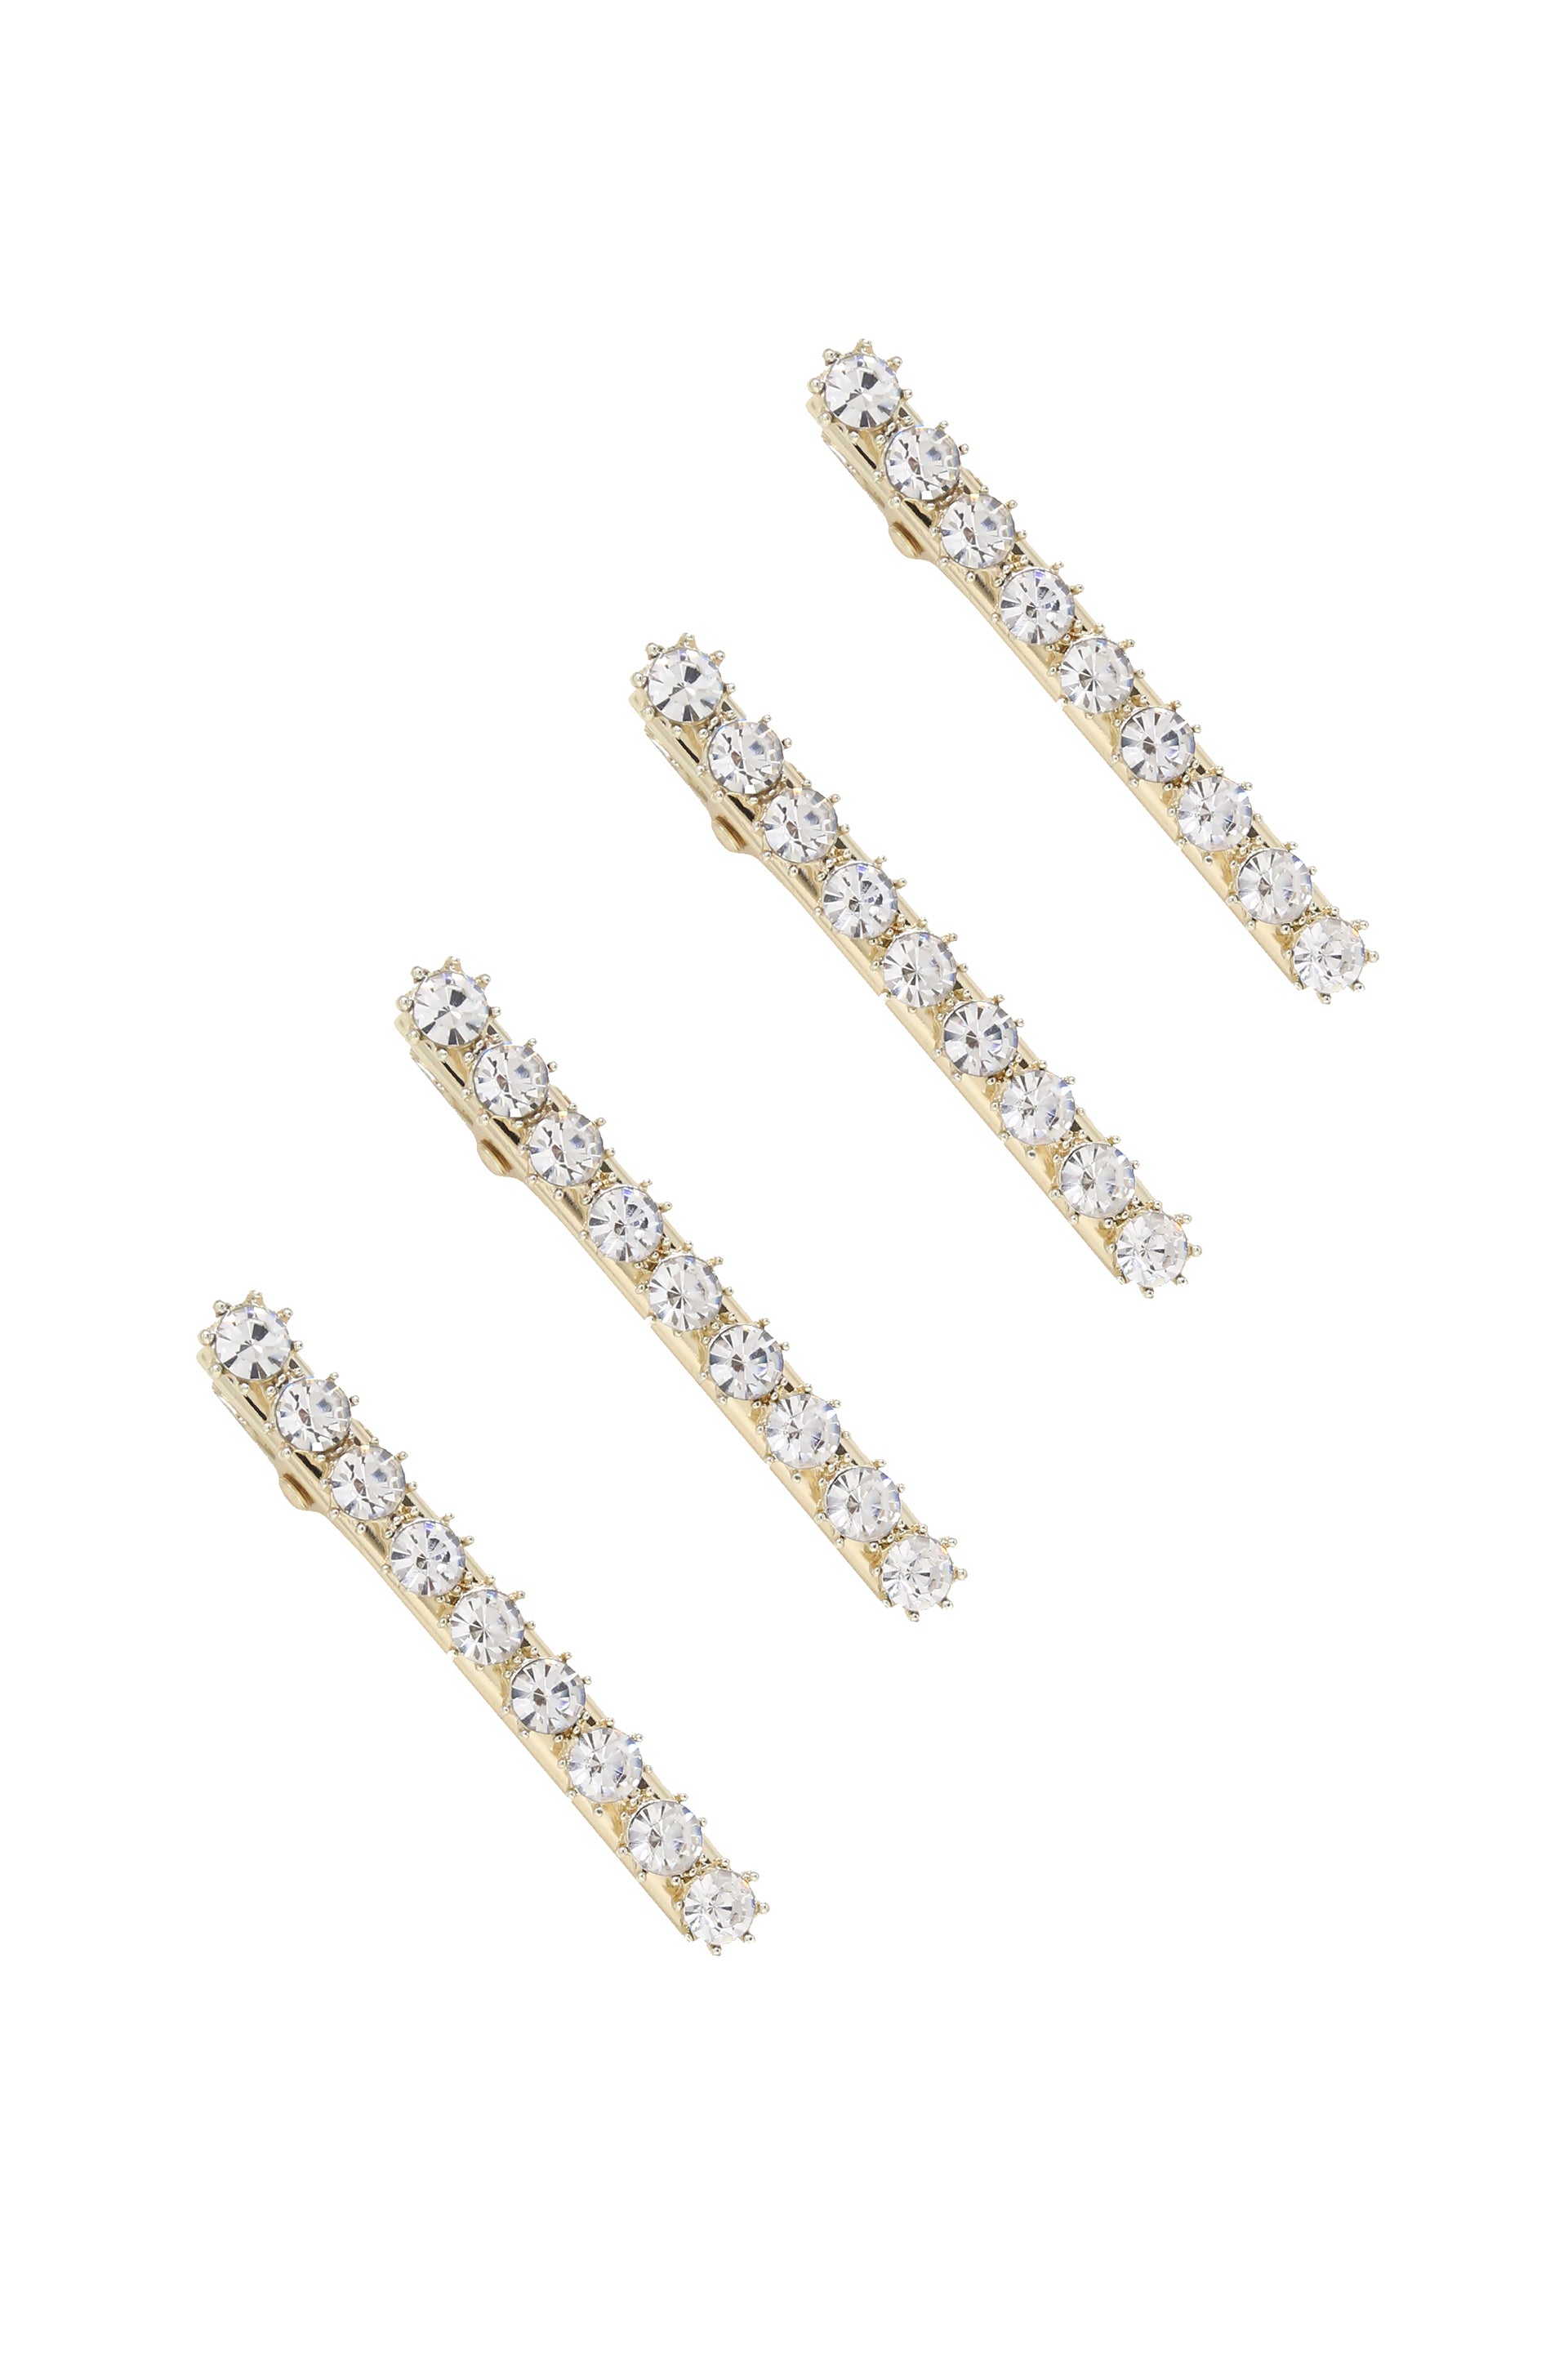 Brittany Crystal Clip Set on white background  